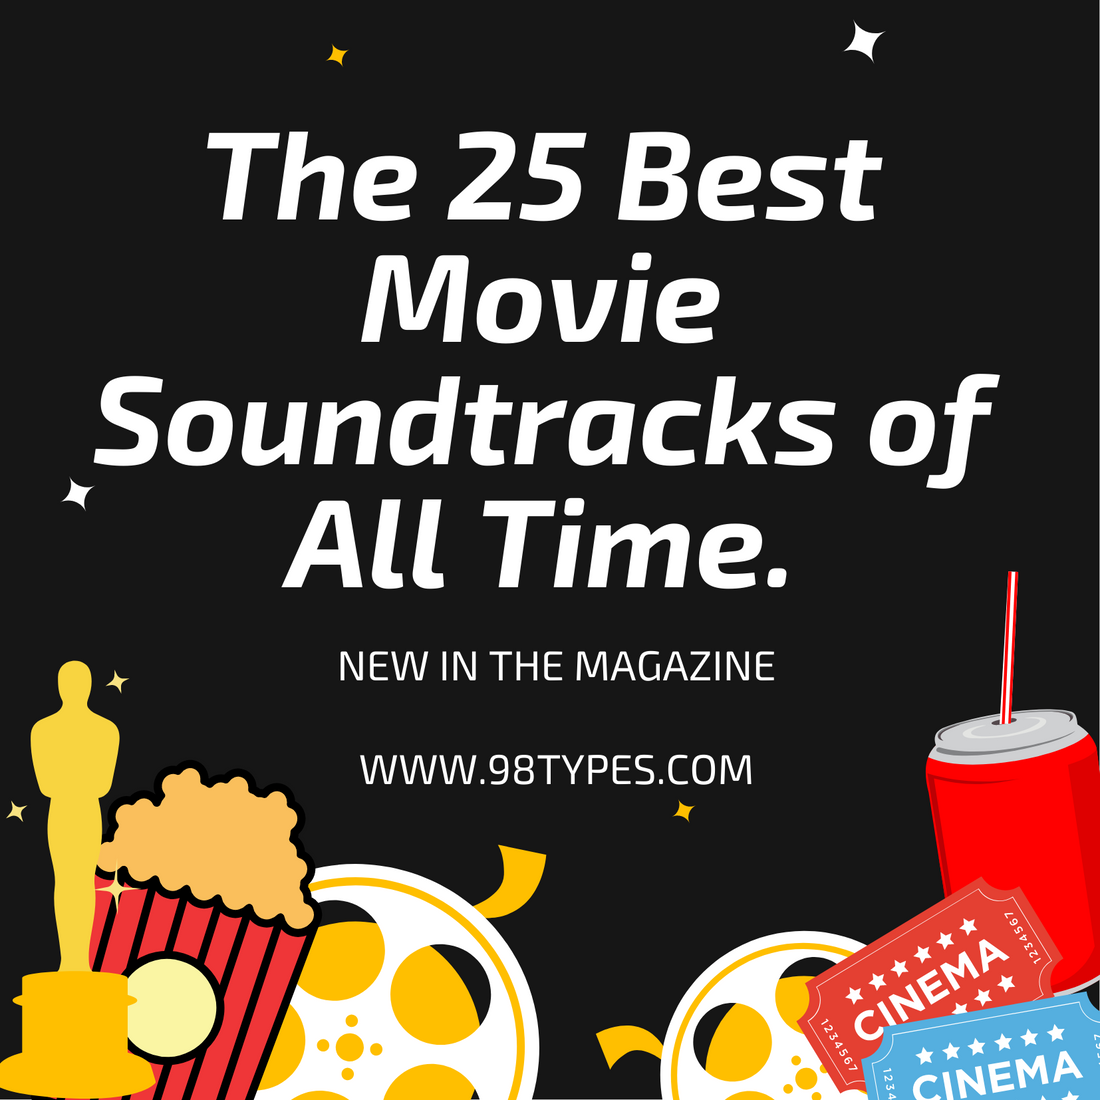 The Top 10 Movies Soundtrack - 98types